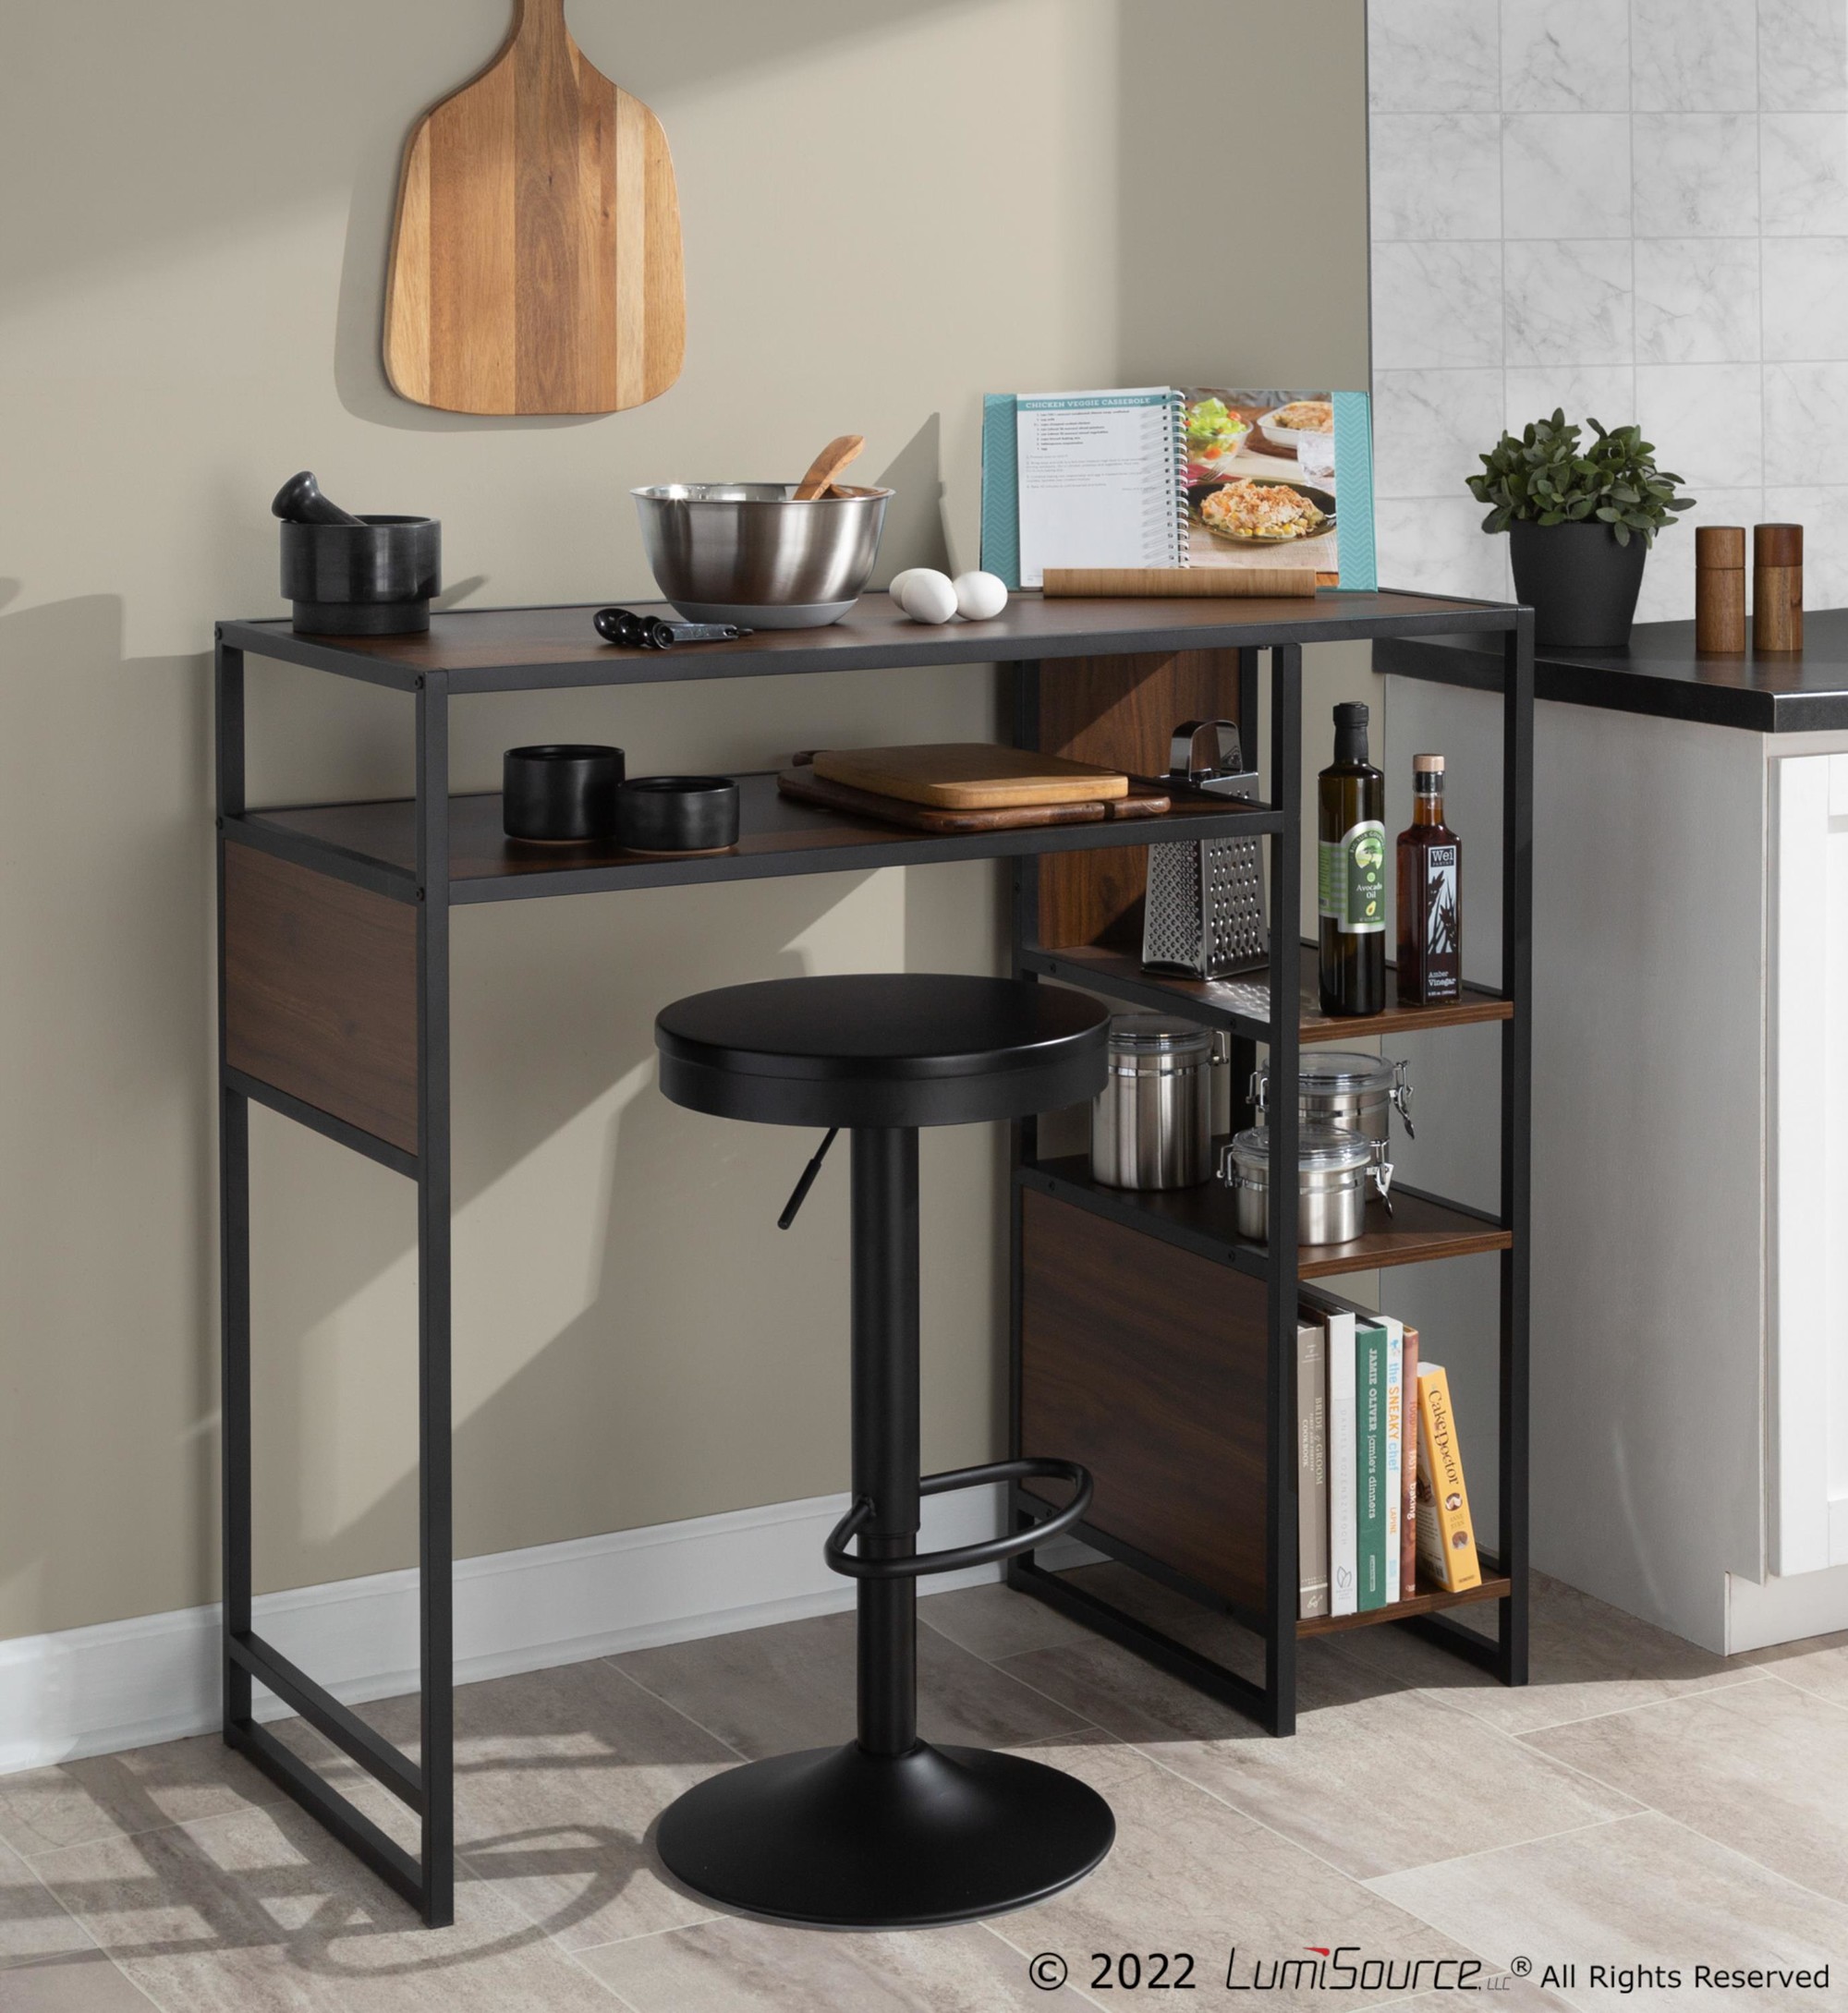 Display Bar Height Table With Storage